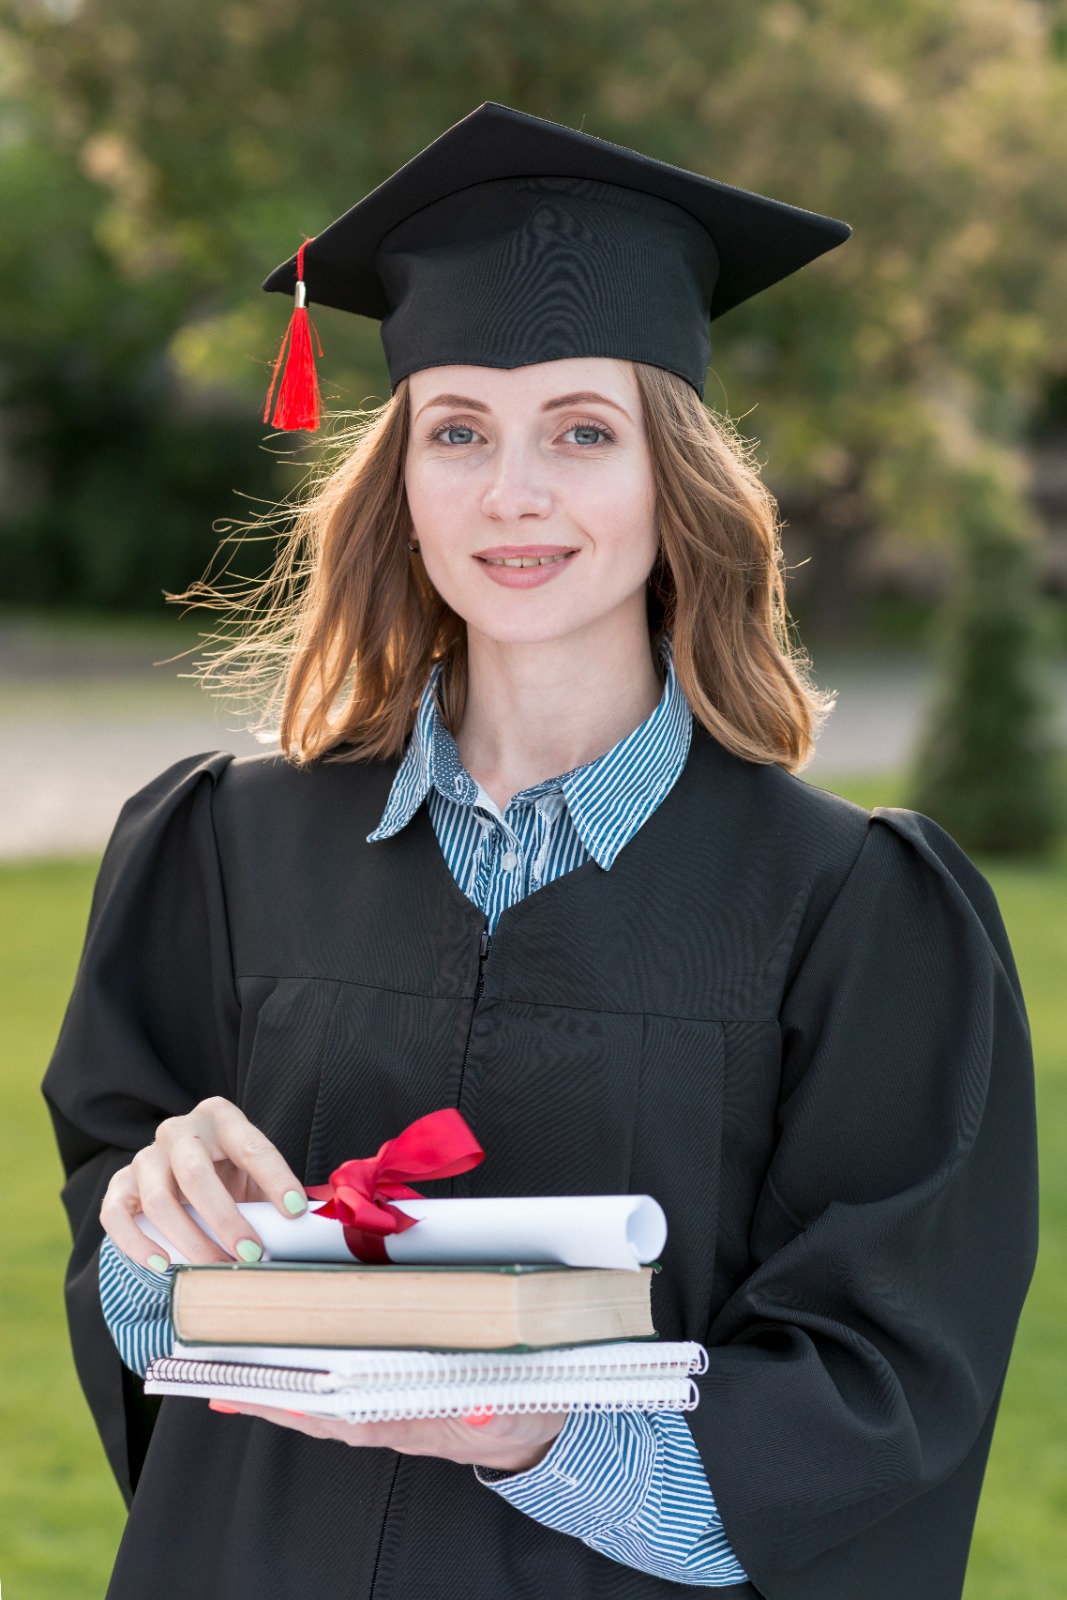 A young woman with a smile on her face holding her book and certificate after successfully finishing graduation convocation day.